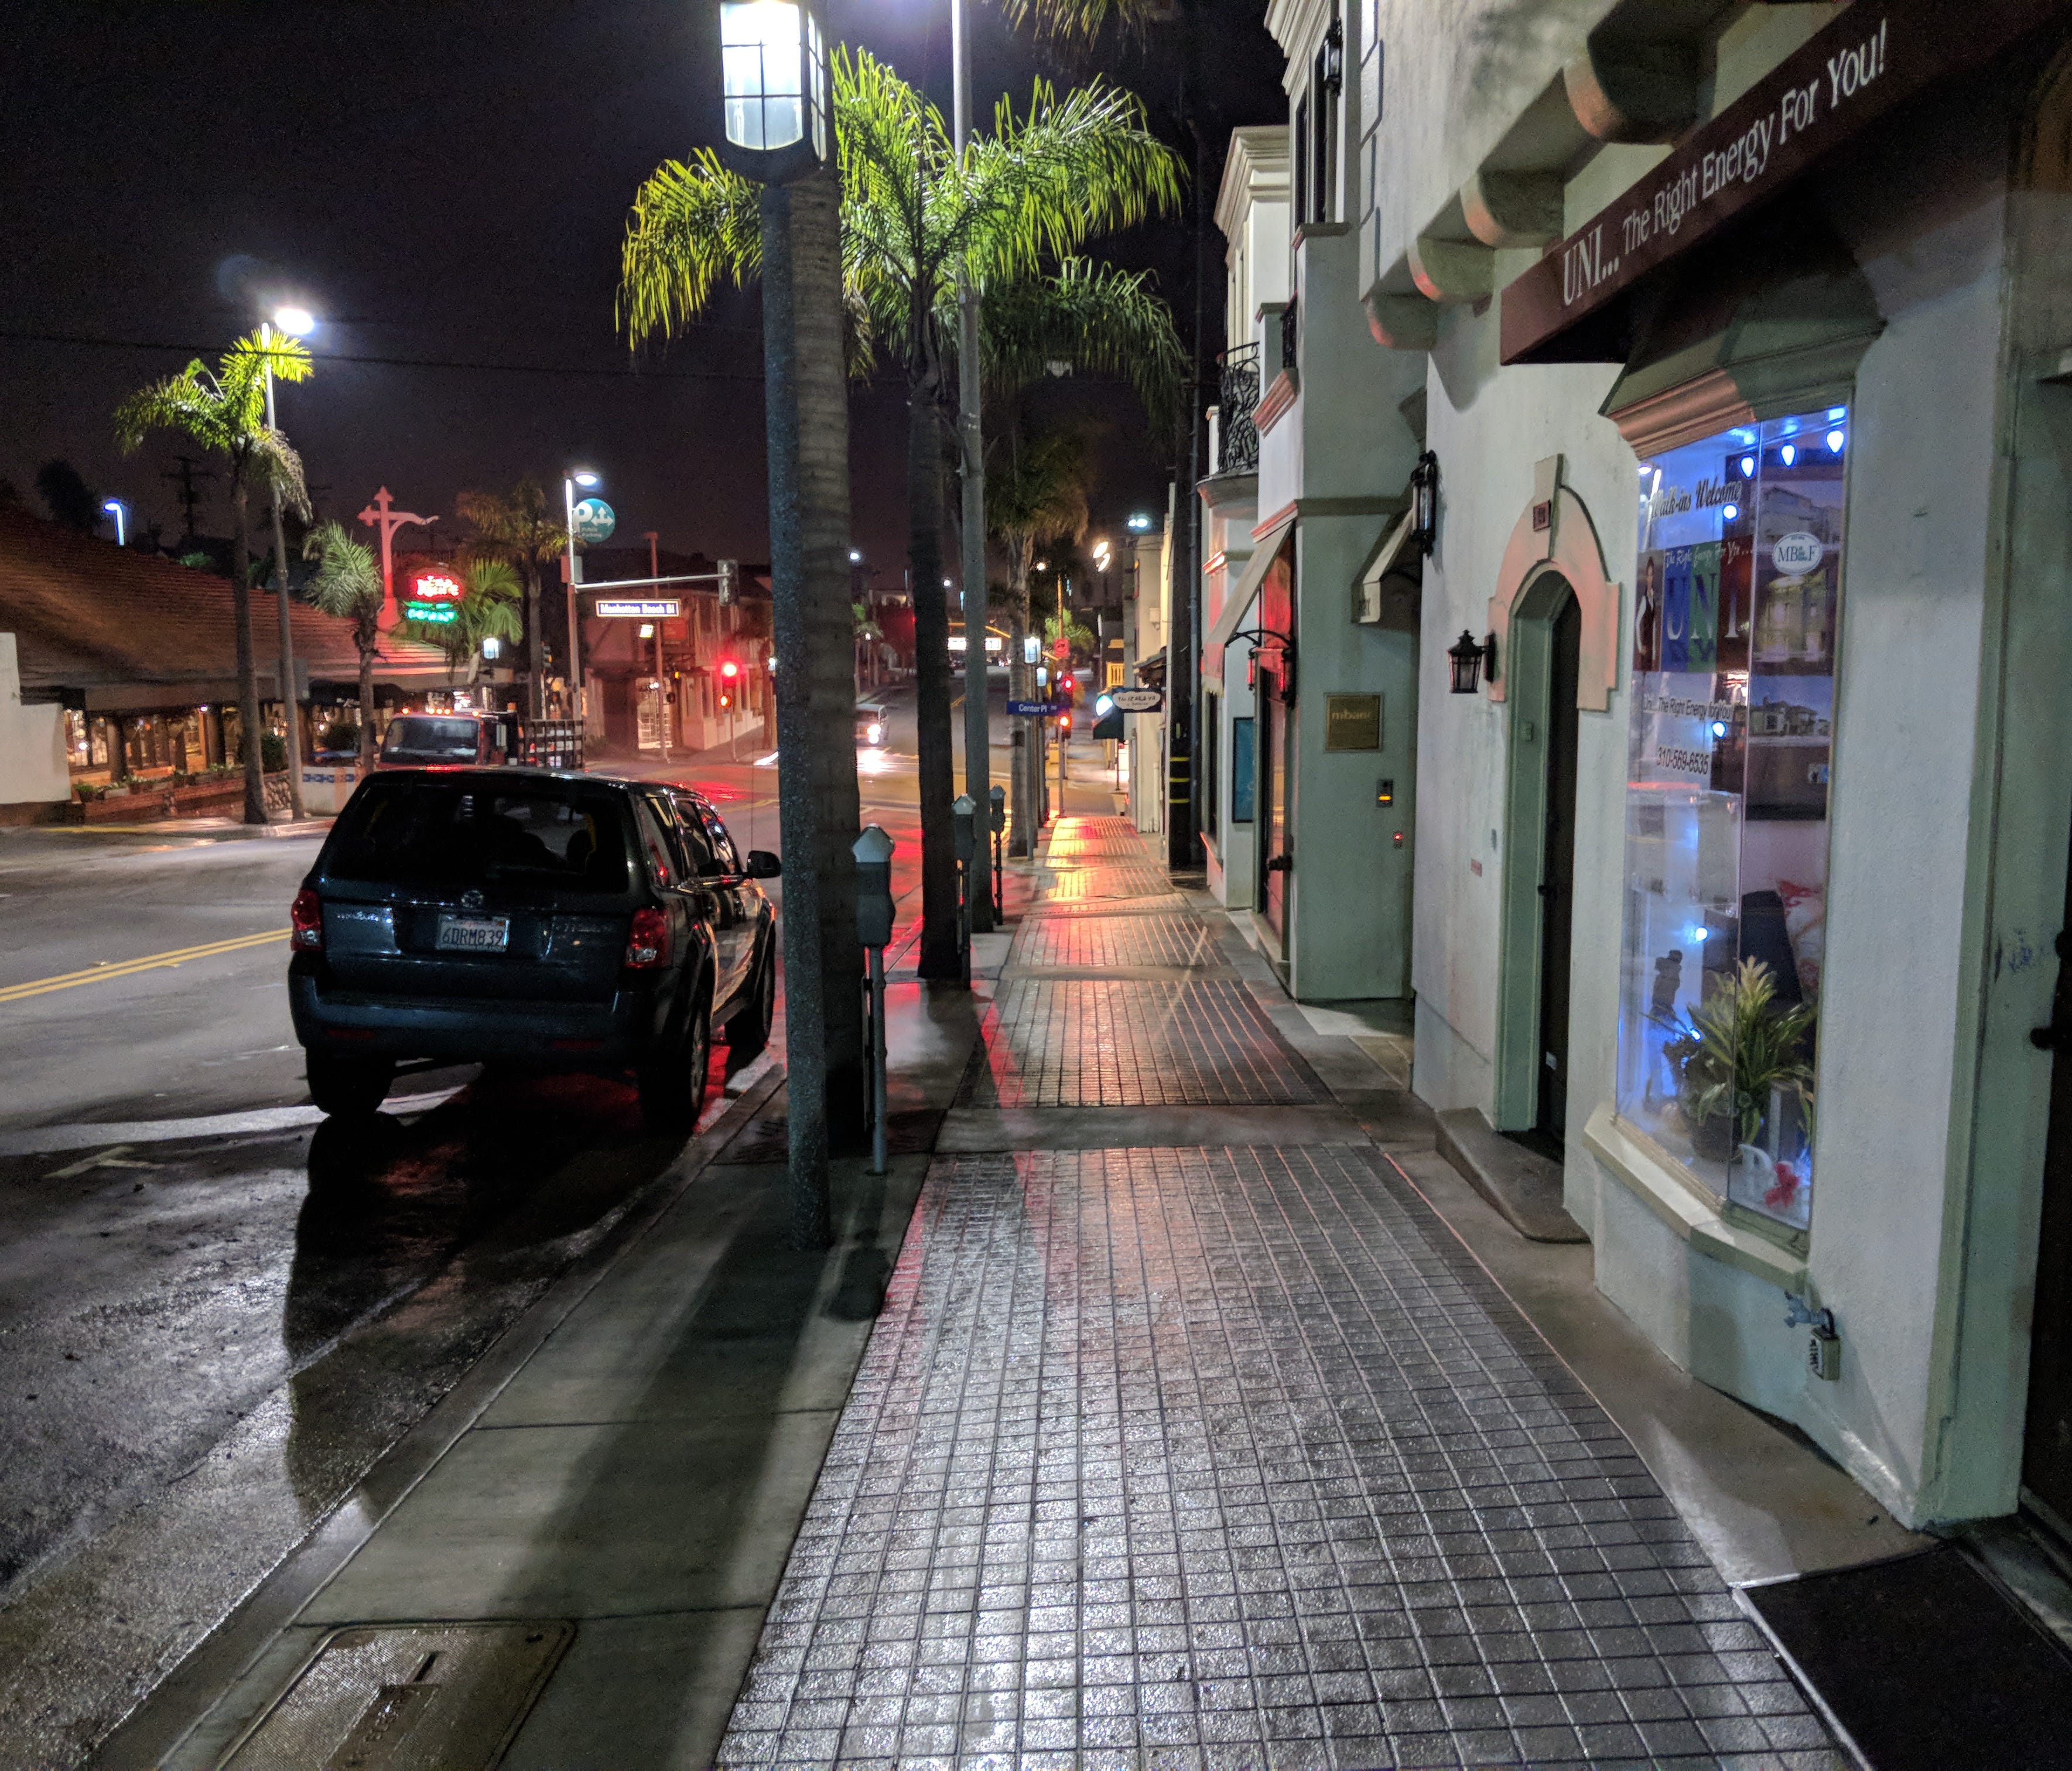 Early morning in downtown Manhattan Beach, as shot on the Google Pixel 2 XL smartphone